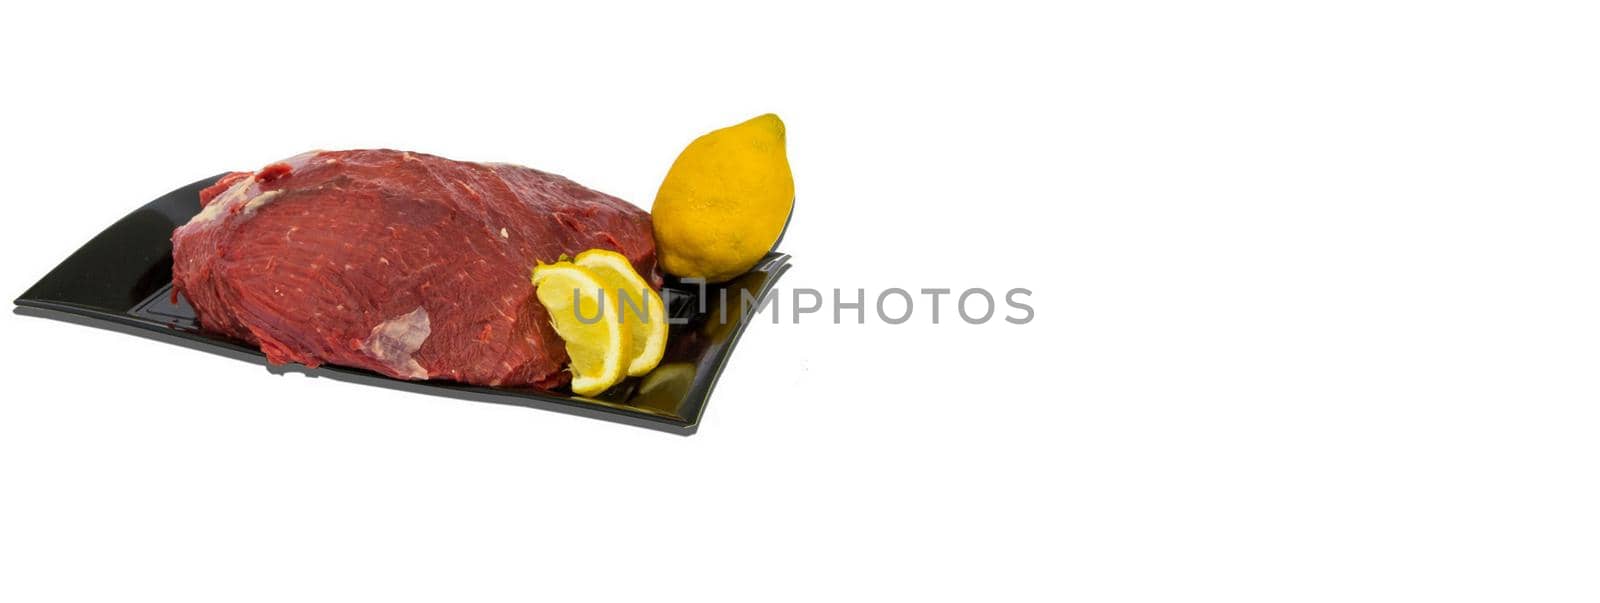 Raw meat dish white background 2 by pippocarlot